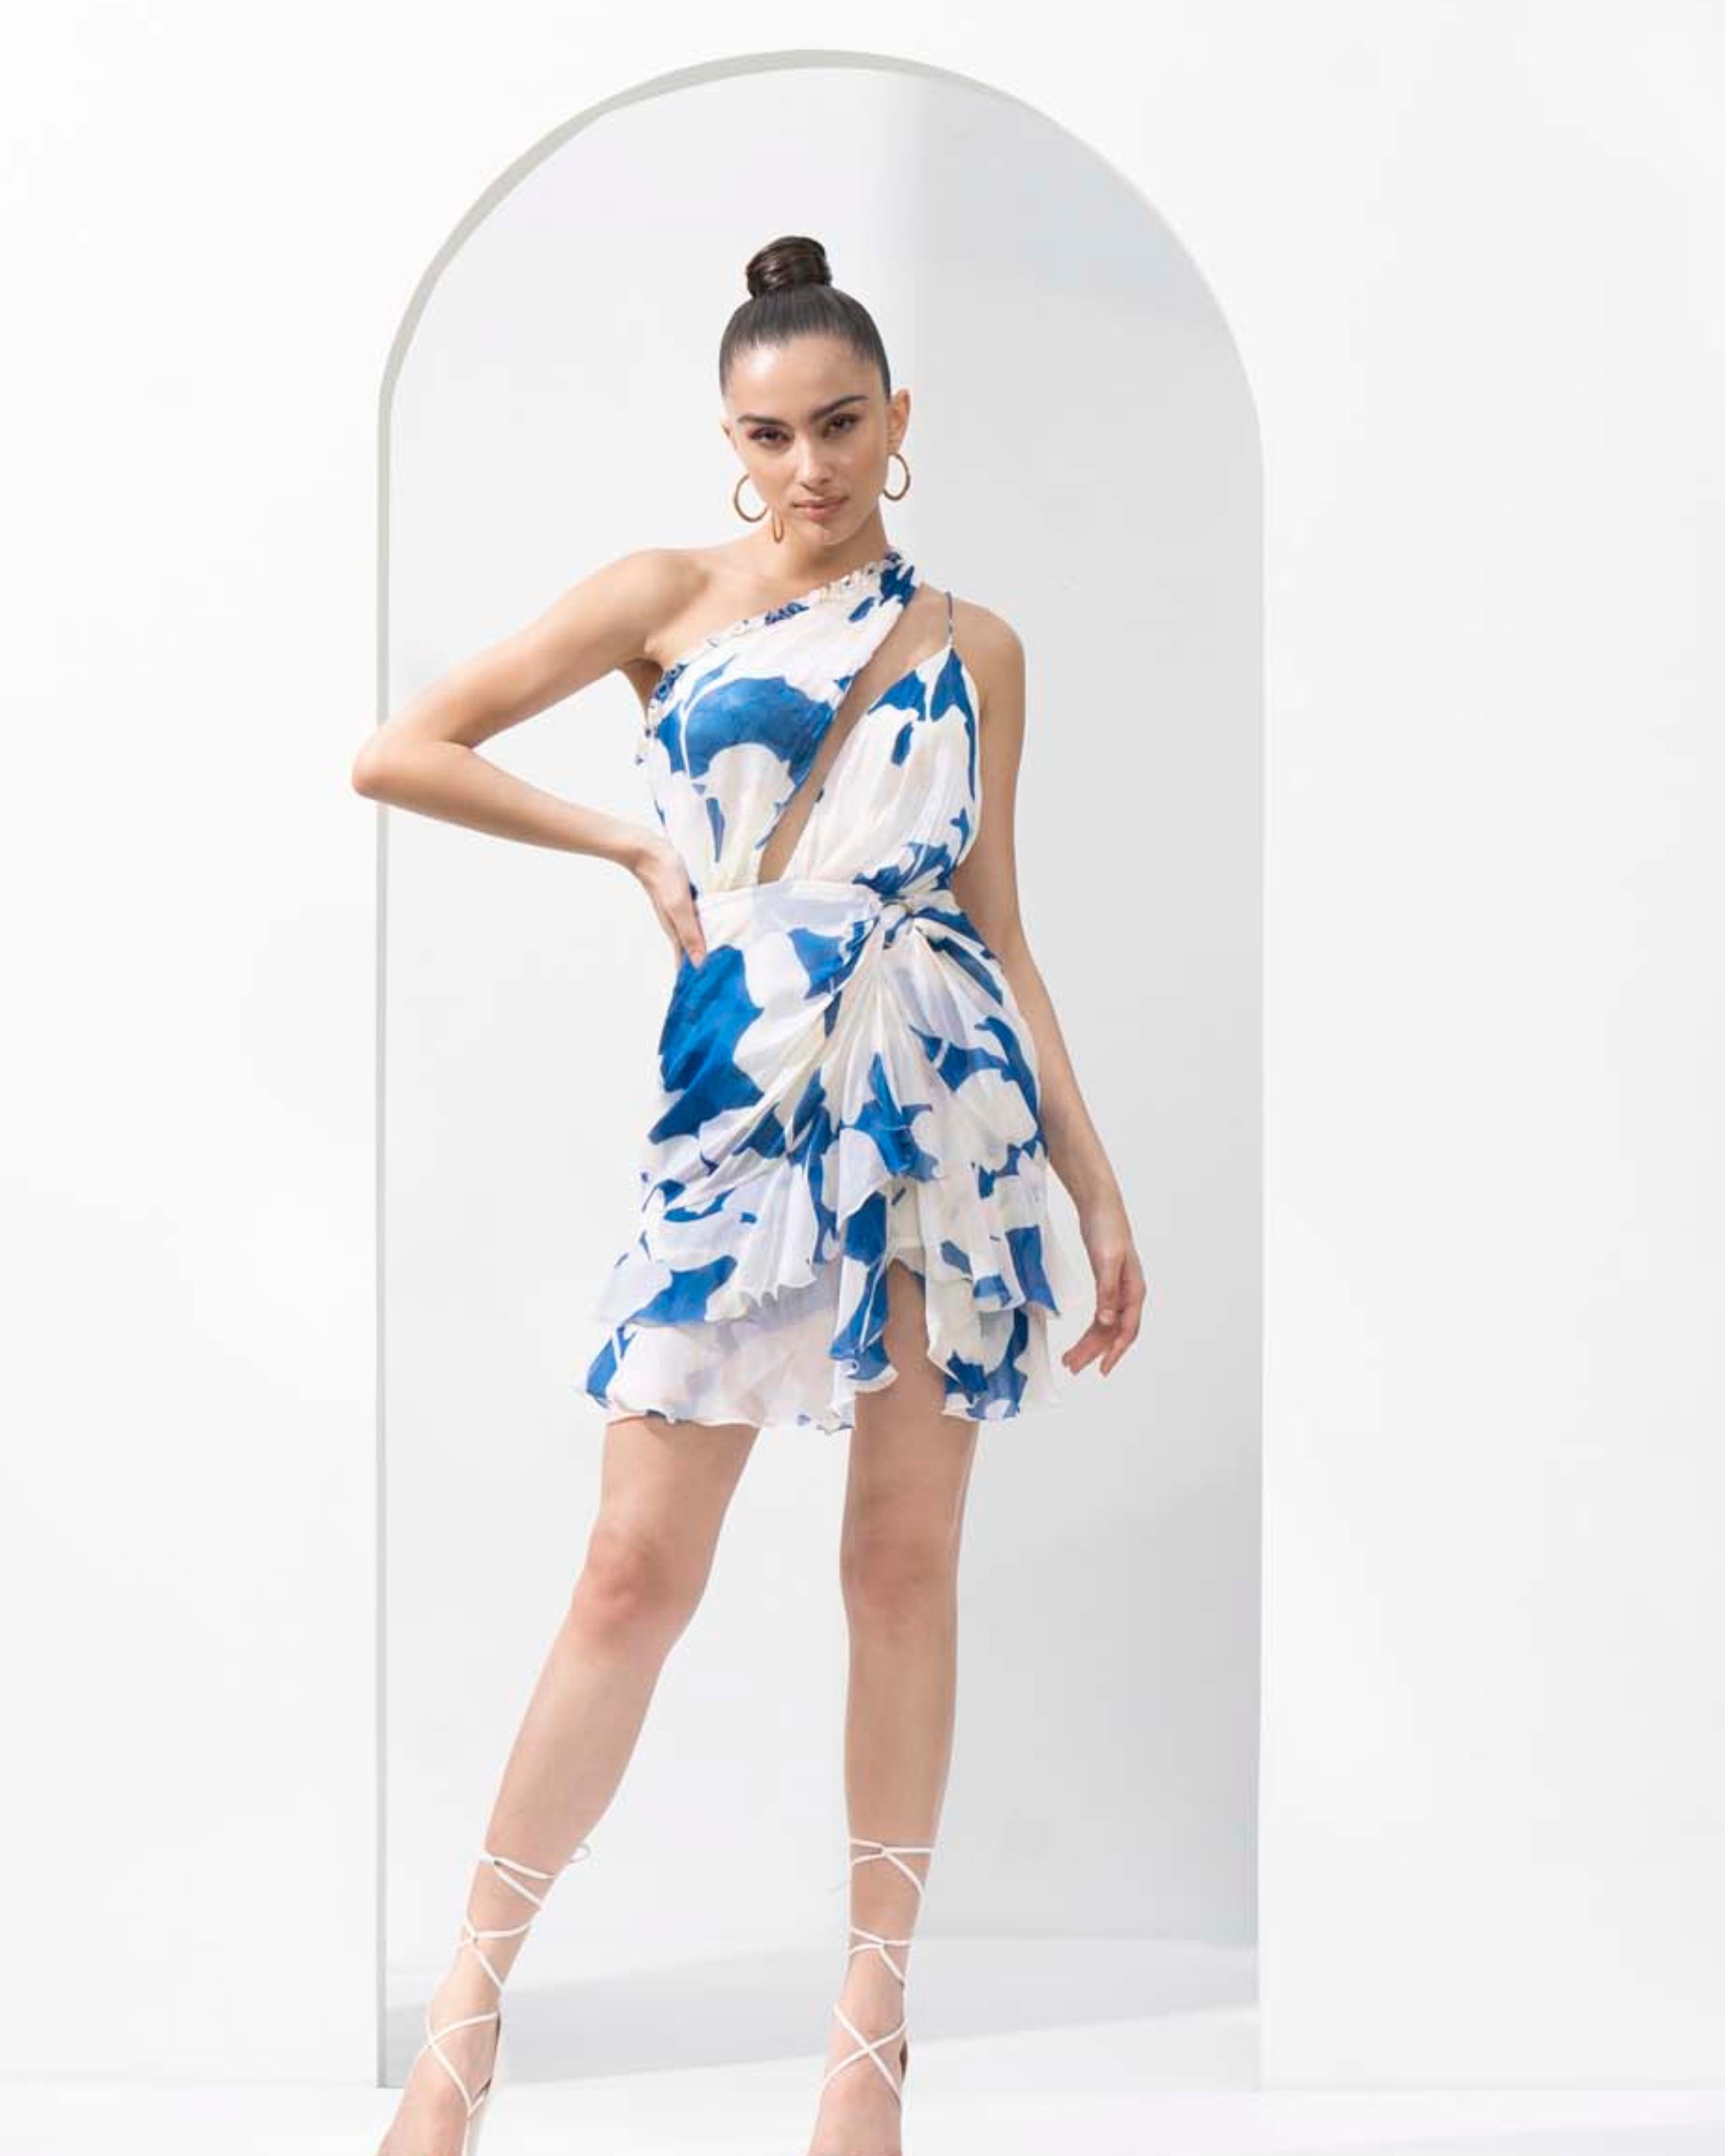 Mystic blue texture printed one-shoulder chiffon short dress with a gold accessory.